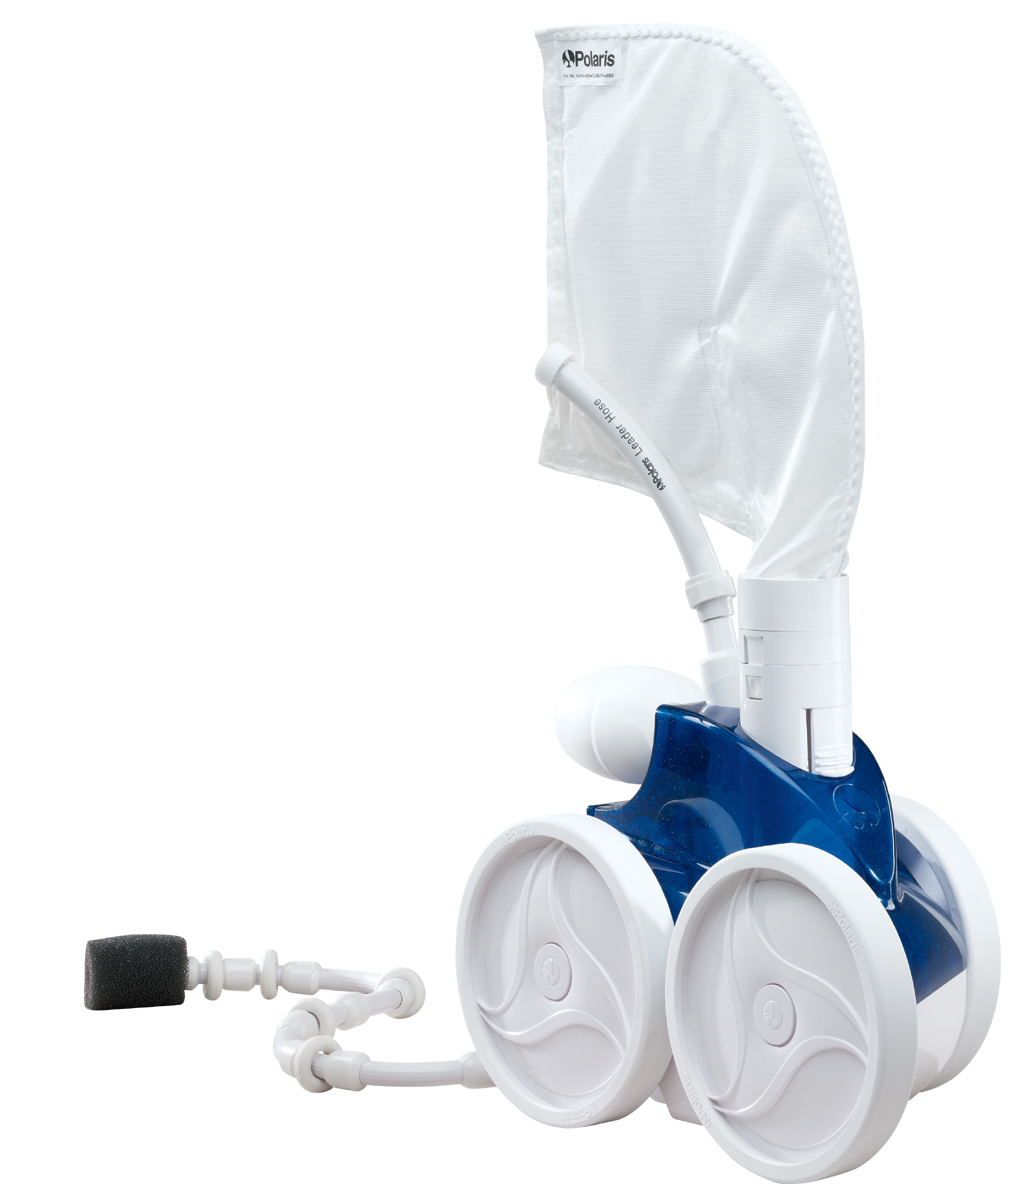 polaris-vac-sweep-380-pressure-side-in-ground-automatic-pool-cleaner